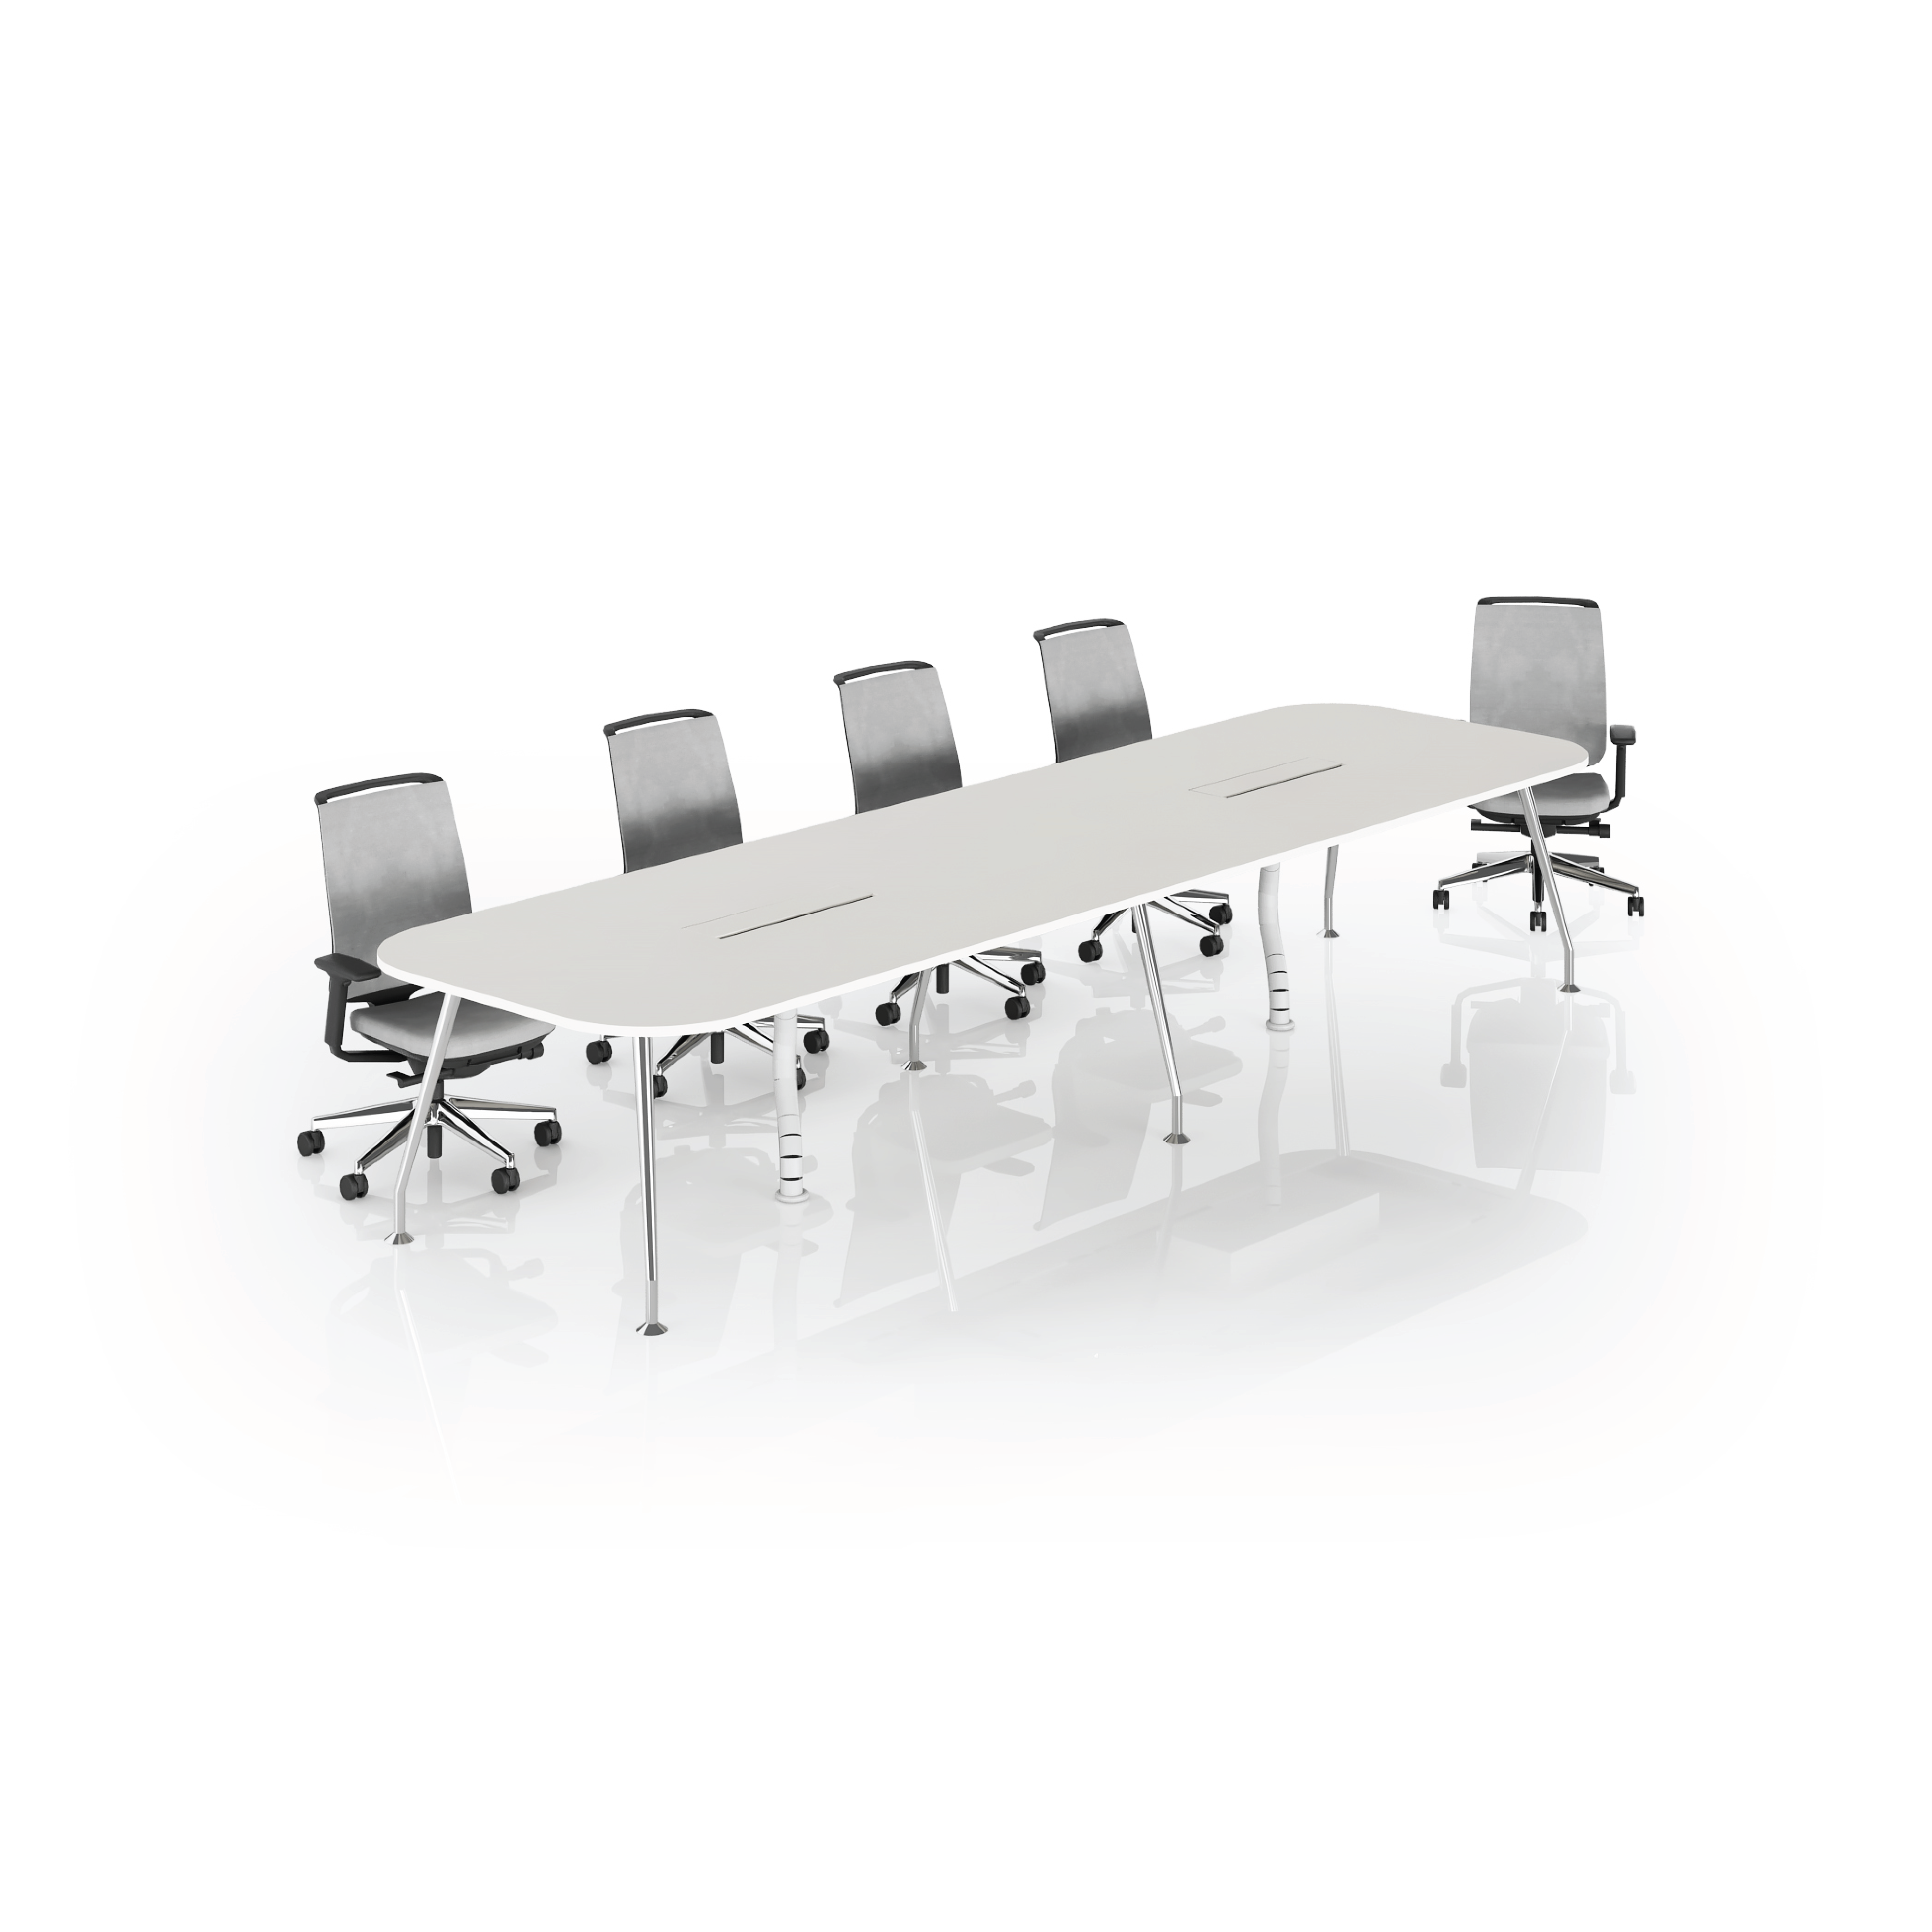 TeamOffice Conference Tables Krome